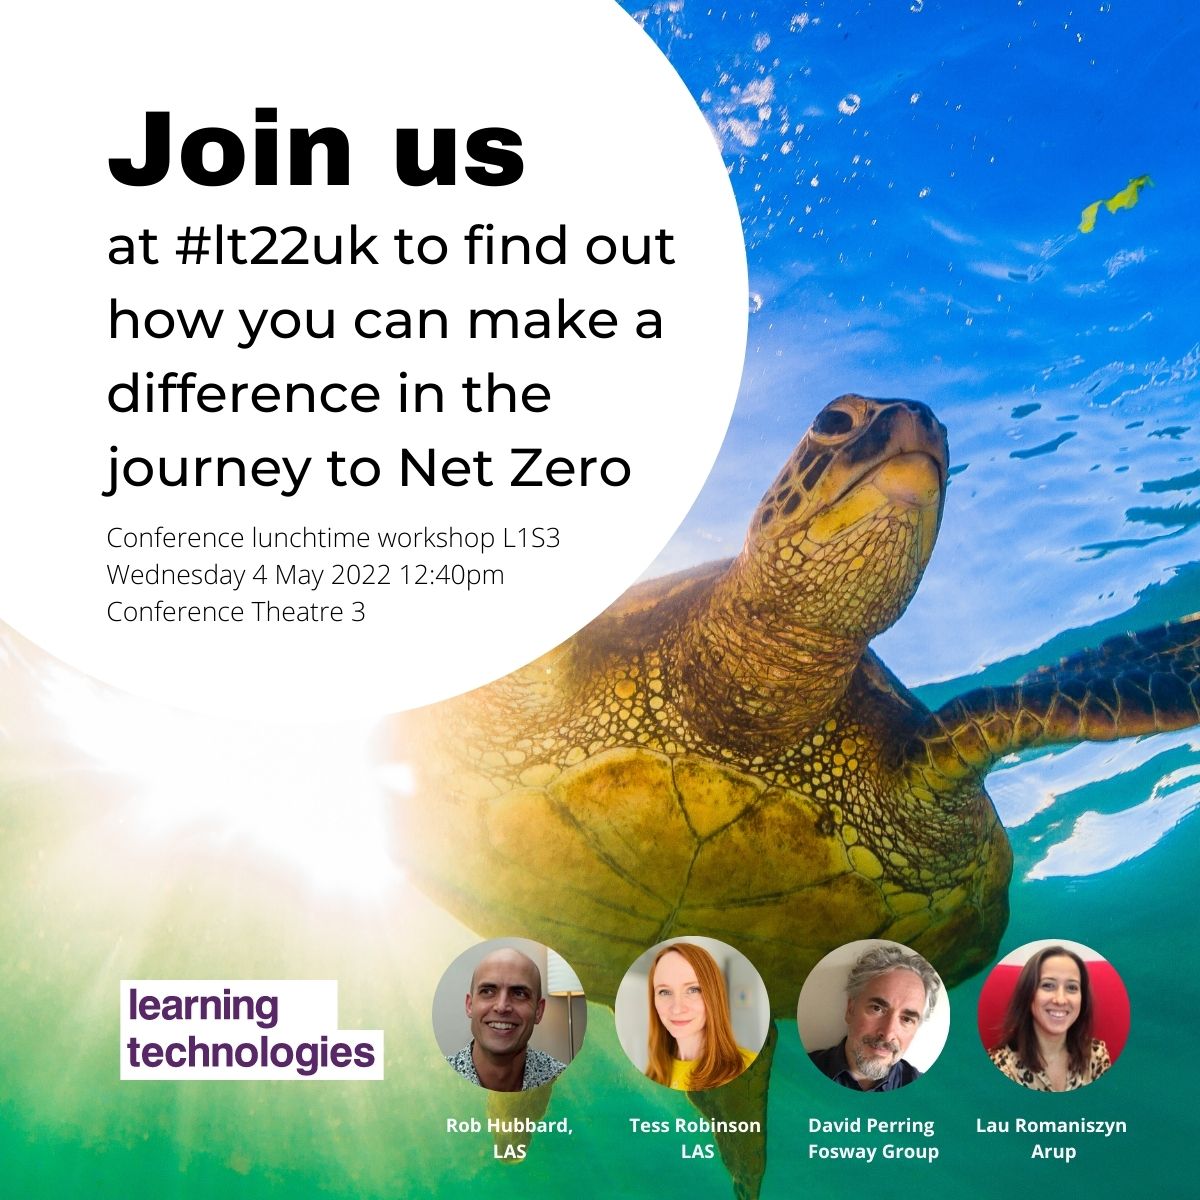 It's nearly time for #LT22UK. @tessrobinsonLAS
 & I will be there & are running a lunchtime workshop session on the 4th with @DavidPerring & Laura Romaniszyn. Come and join us, and make a difference. #Greenlearning @LASLearning #Planet #NetZero #bcorp #learninganddevelopment